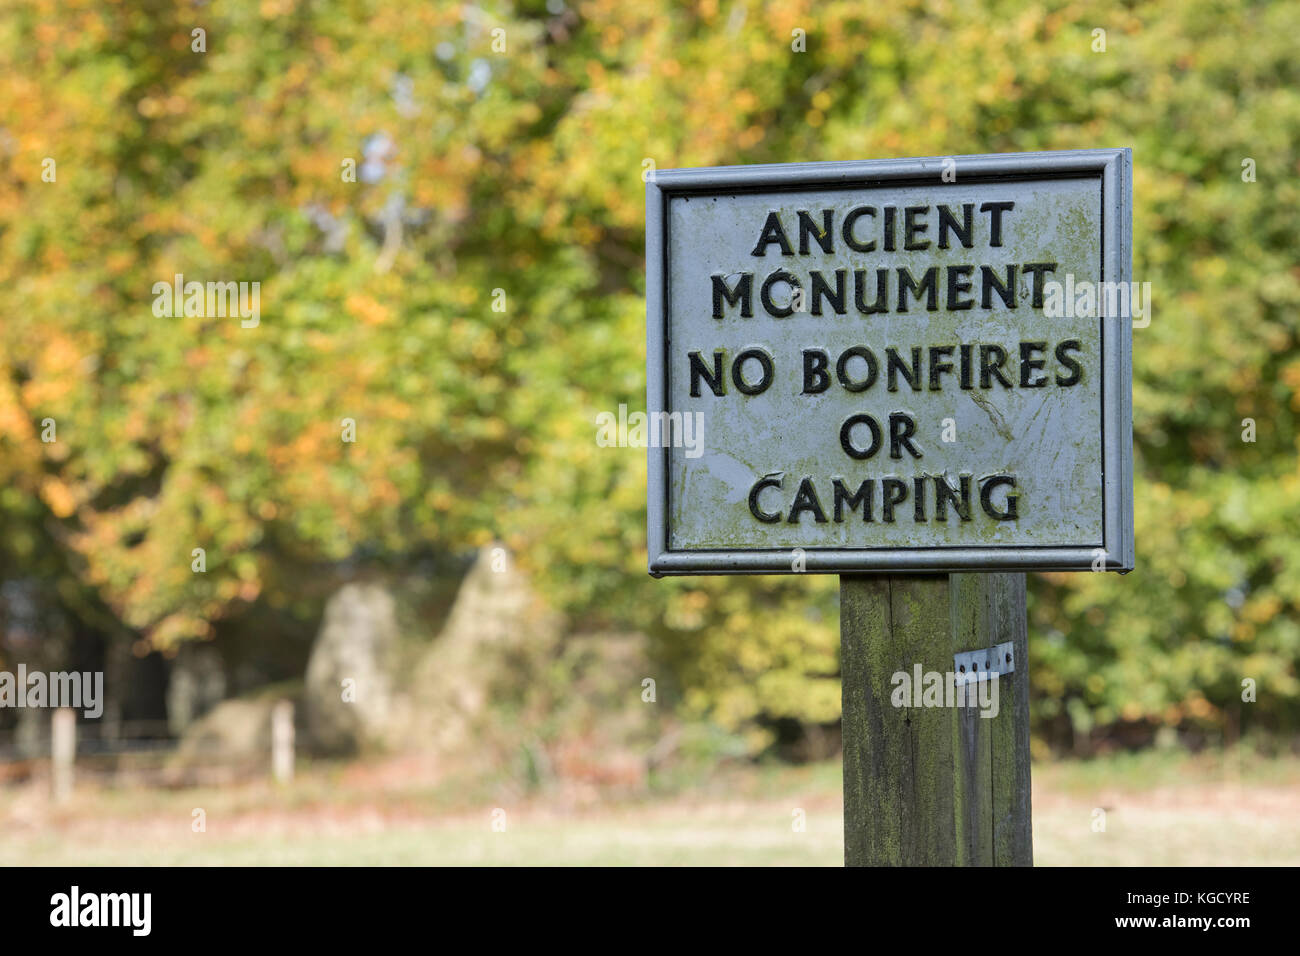 Ancient monument, no fires and camping sign at the entrance to Waylands Smithy, the Ridgeway, Ashbury, Oxfordshire, England. Stock Photo